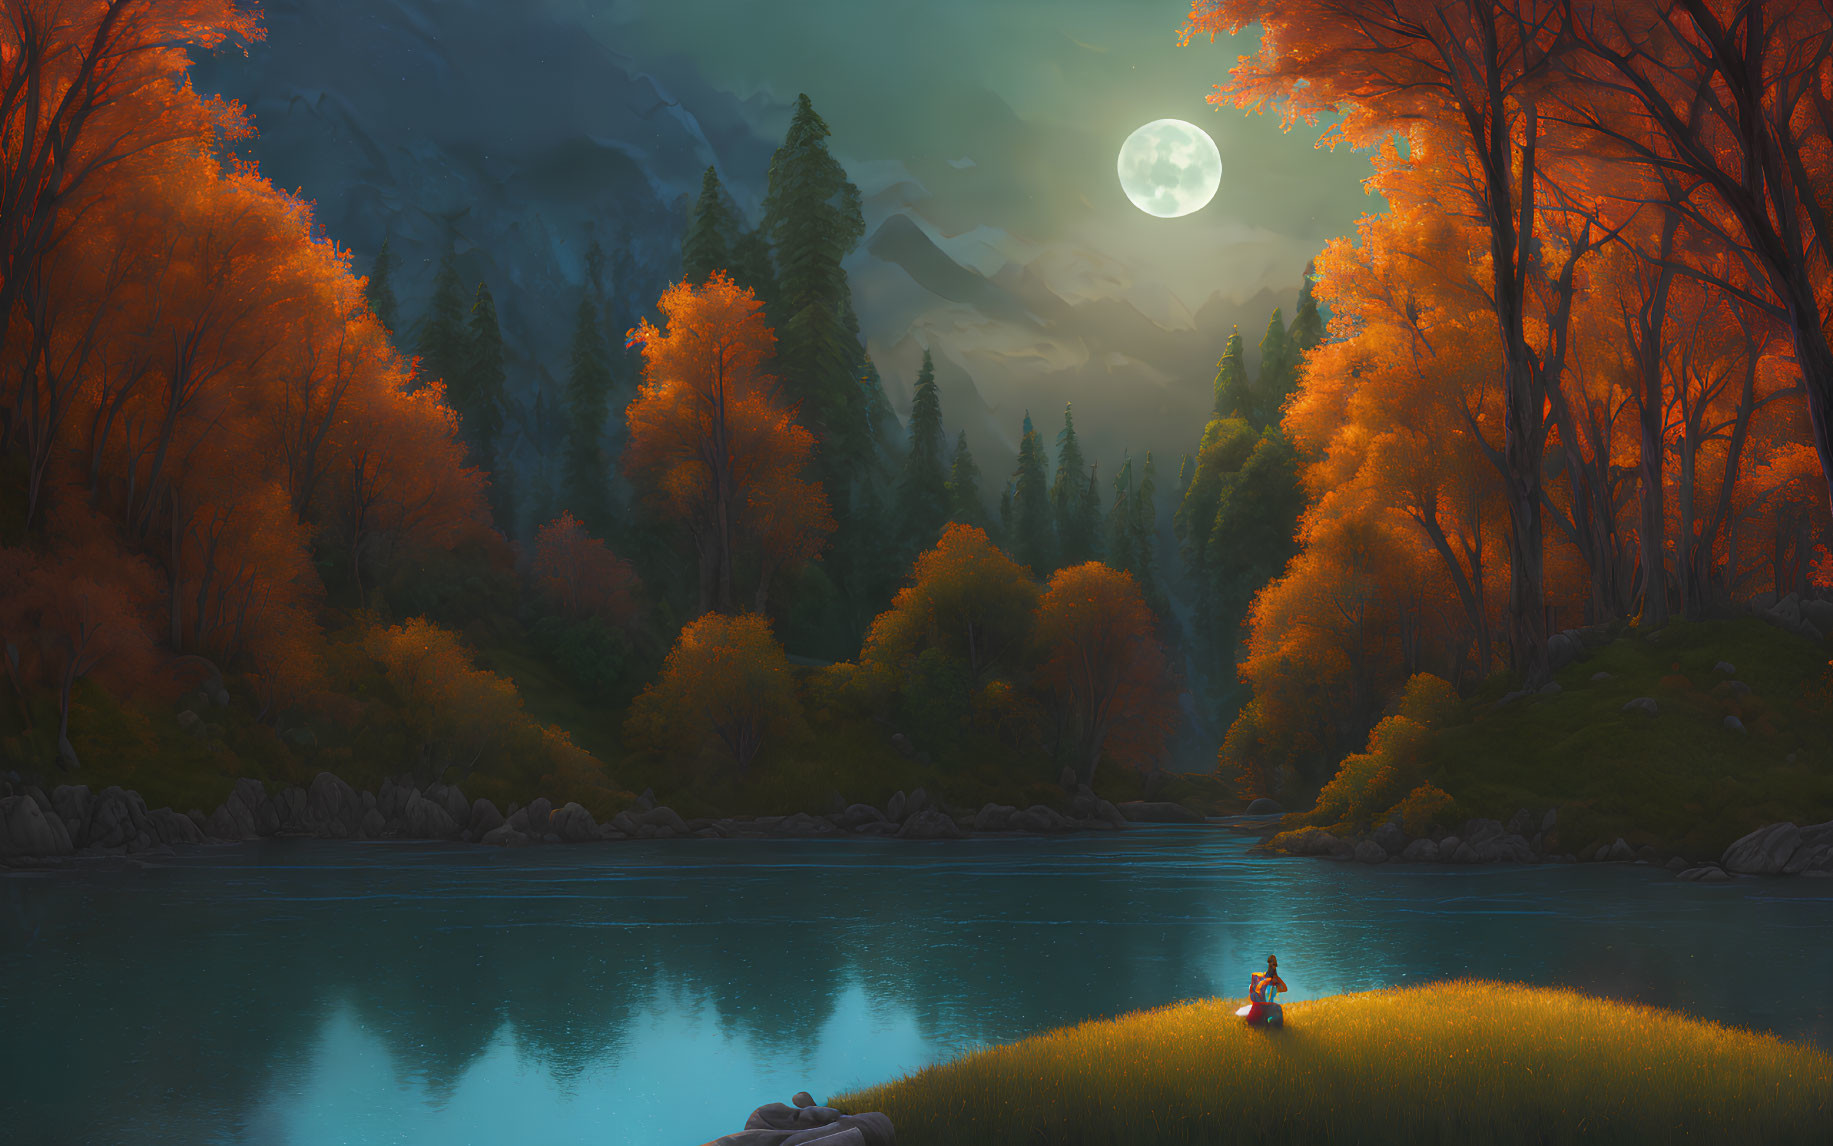 Full Moon Over Autumnal Forest by Tranquil River at Night